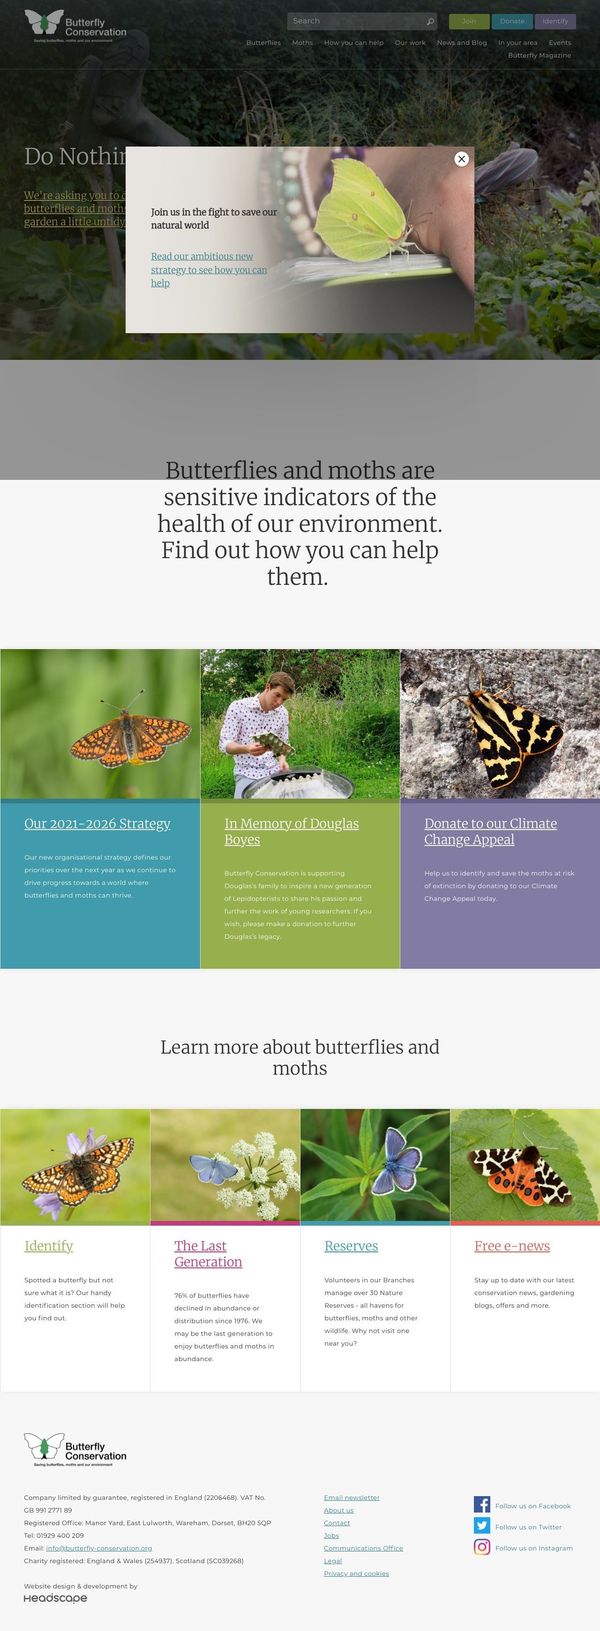 butterfly-conservation.org